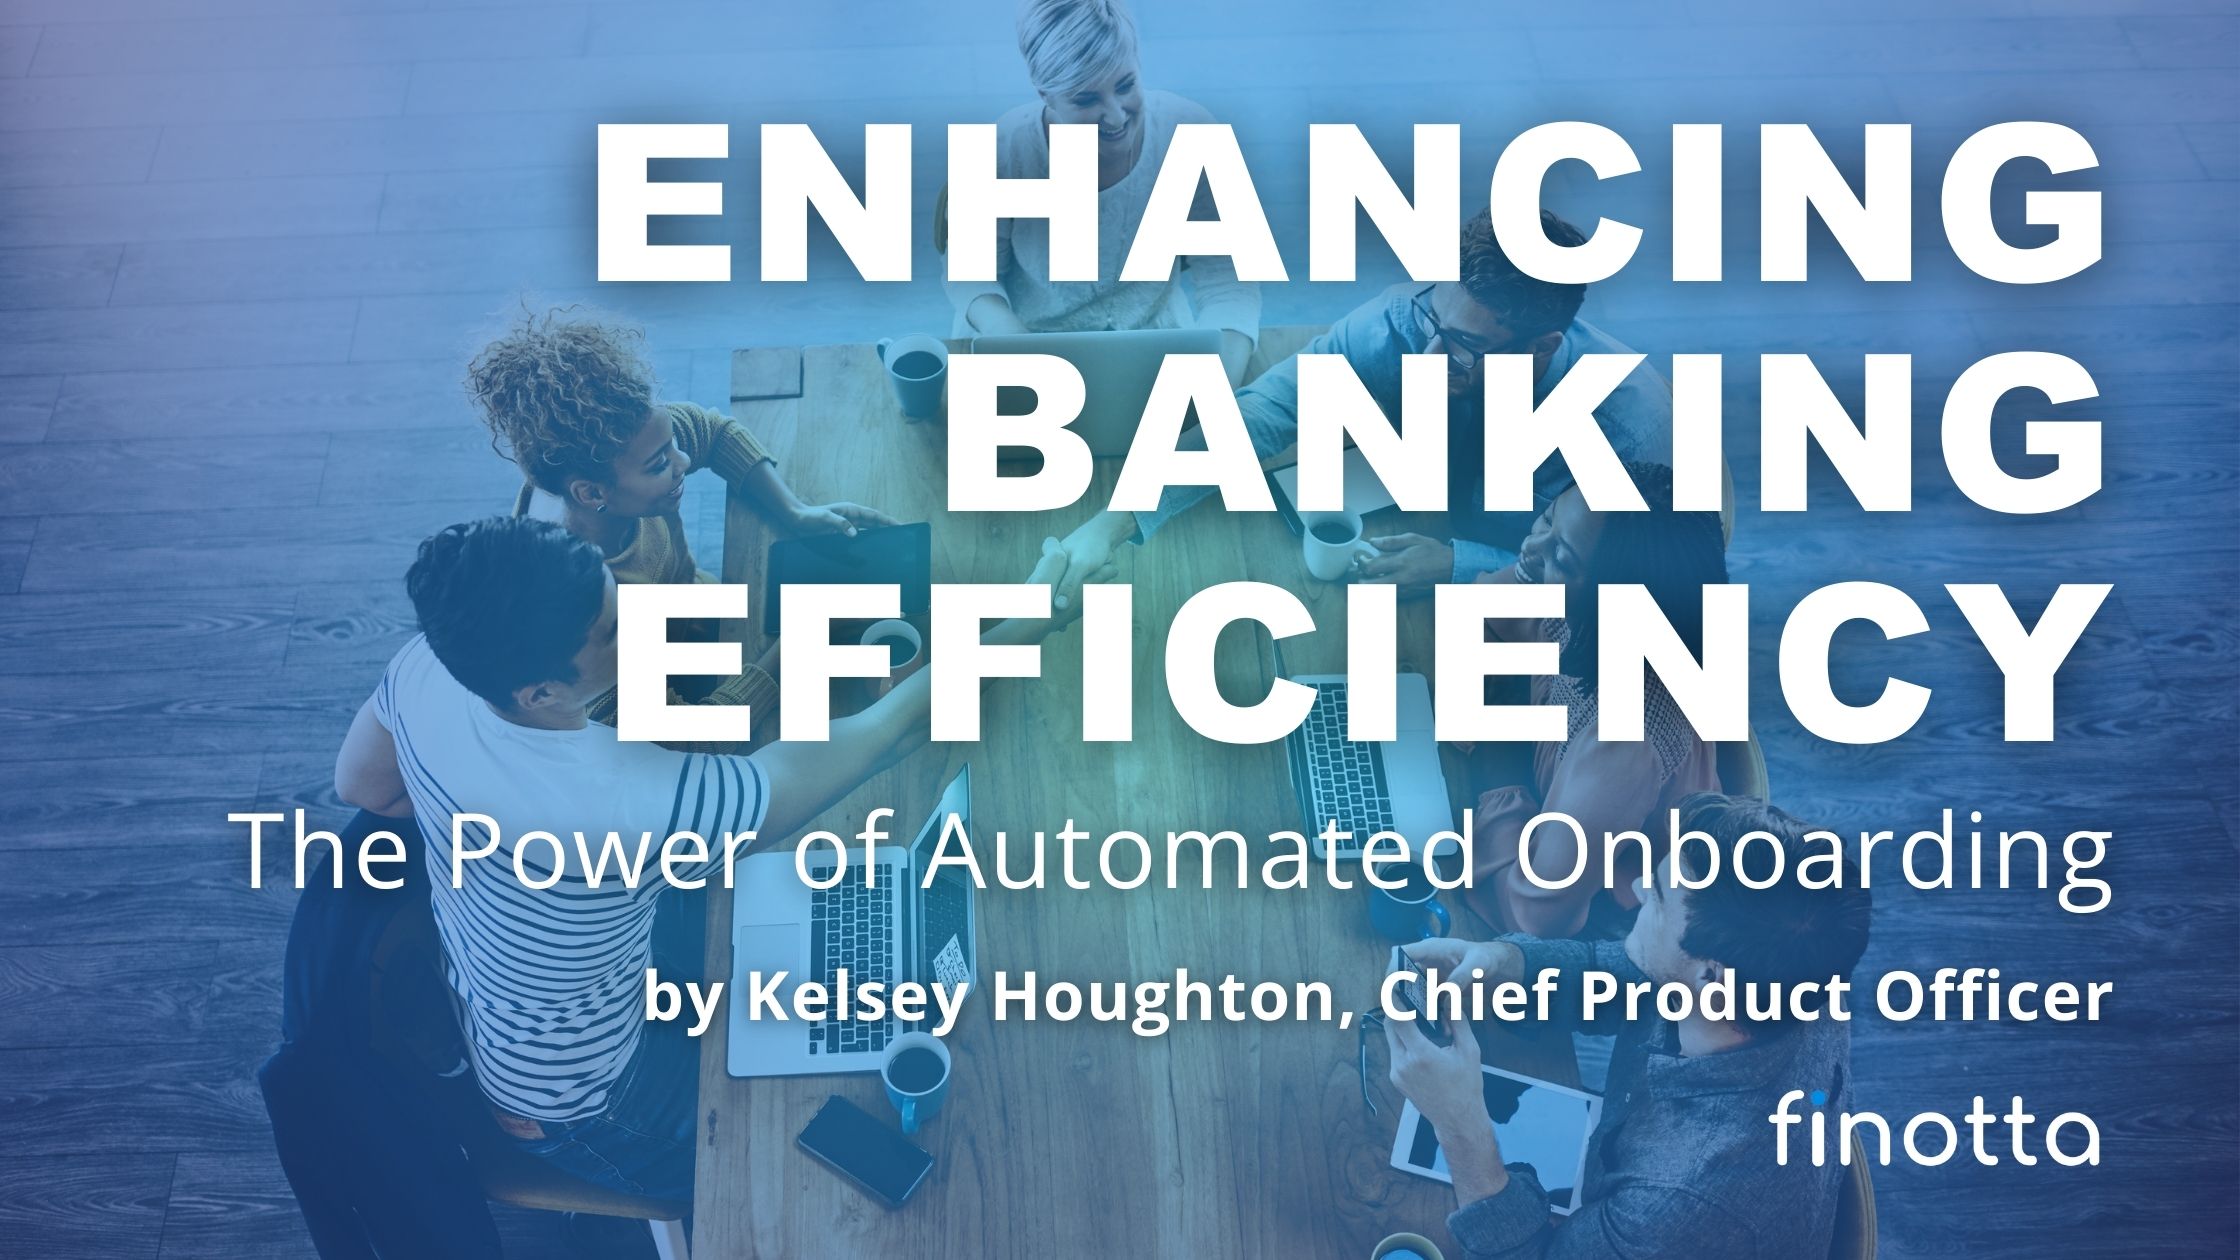 Enhancing Banking Efficiency: The Power of Automated Onboarding